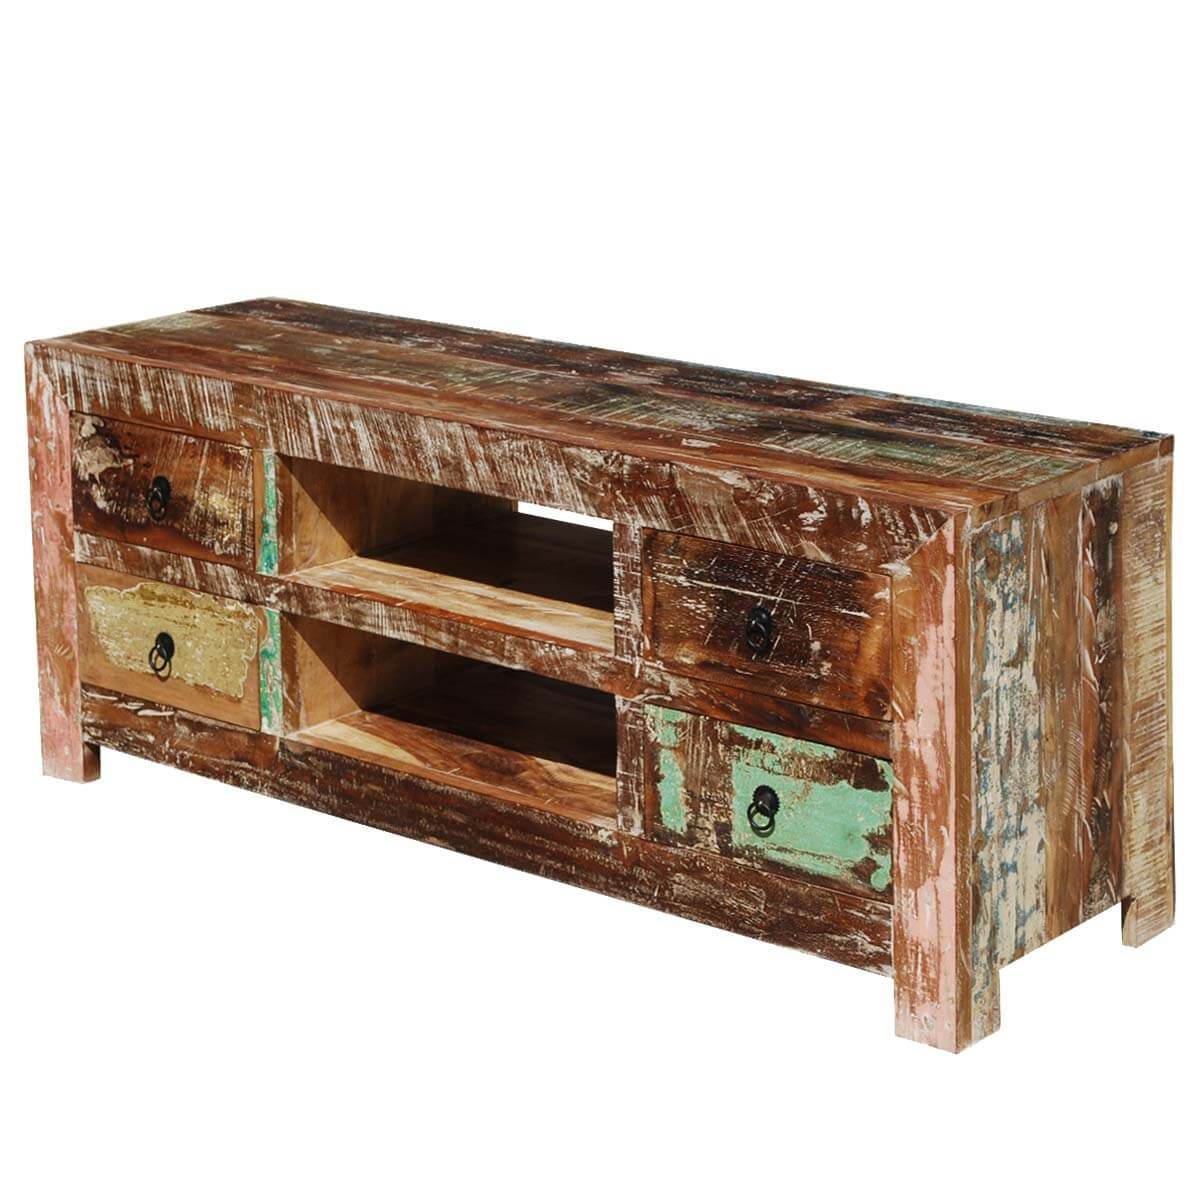 Moultrie Distressed Reclaimed Wood 4 Drawer Rustic Media In Rustic Wood Tv Cabinets (View 9 of 15)